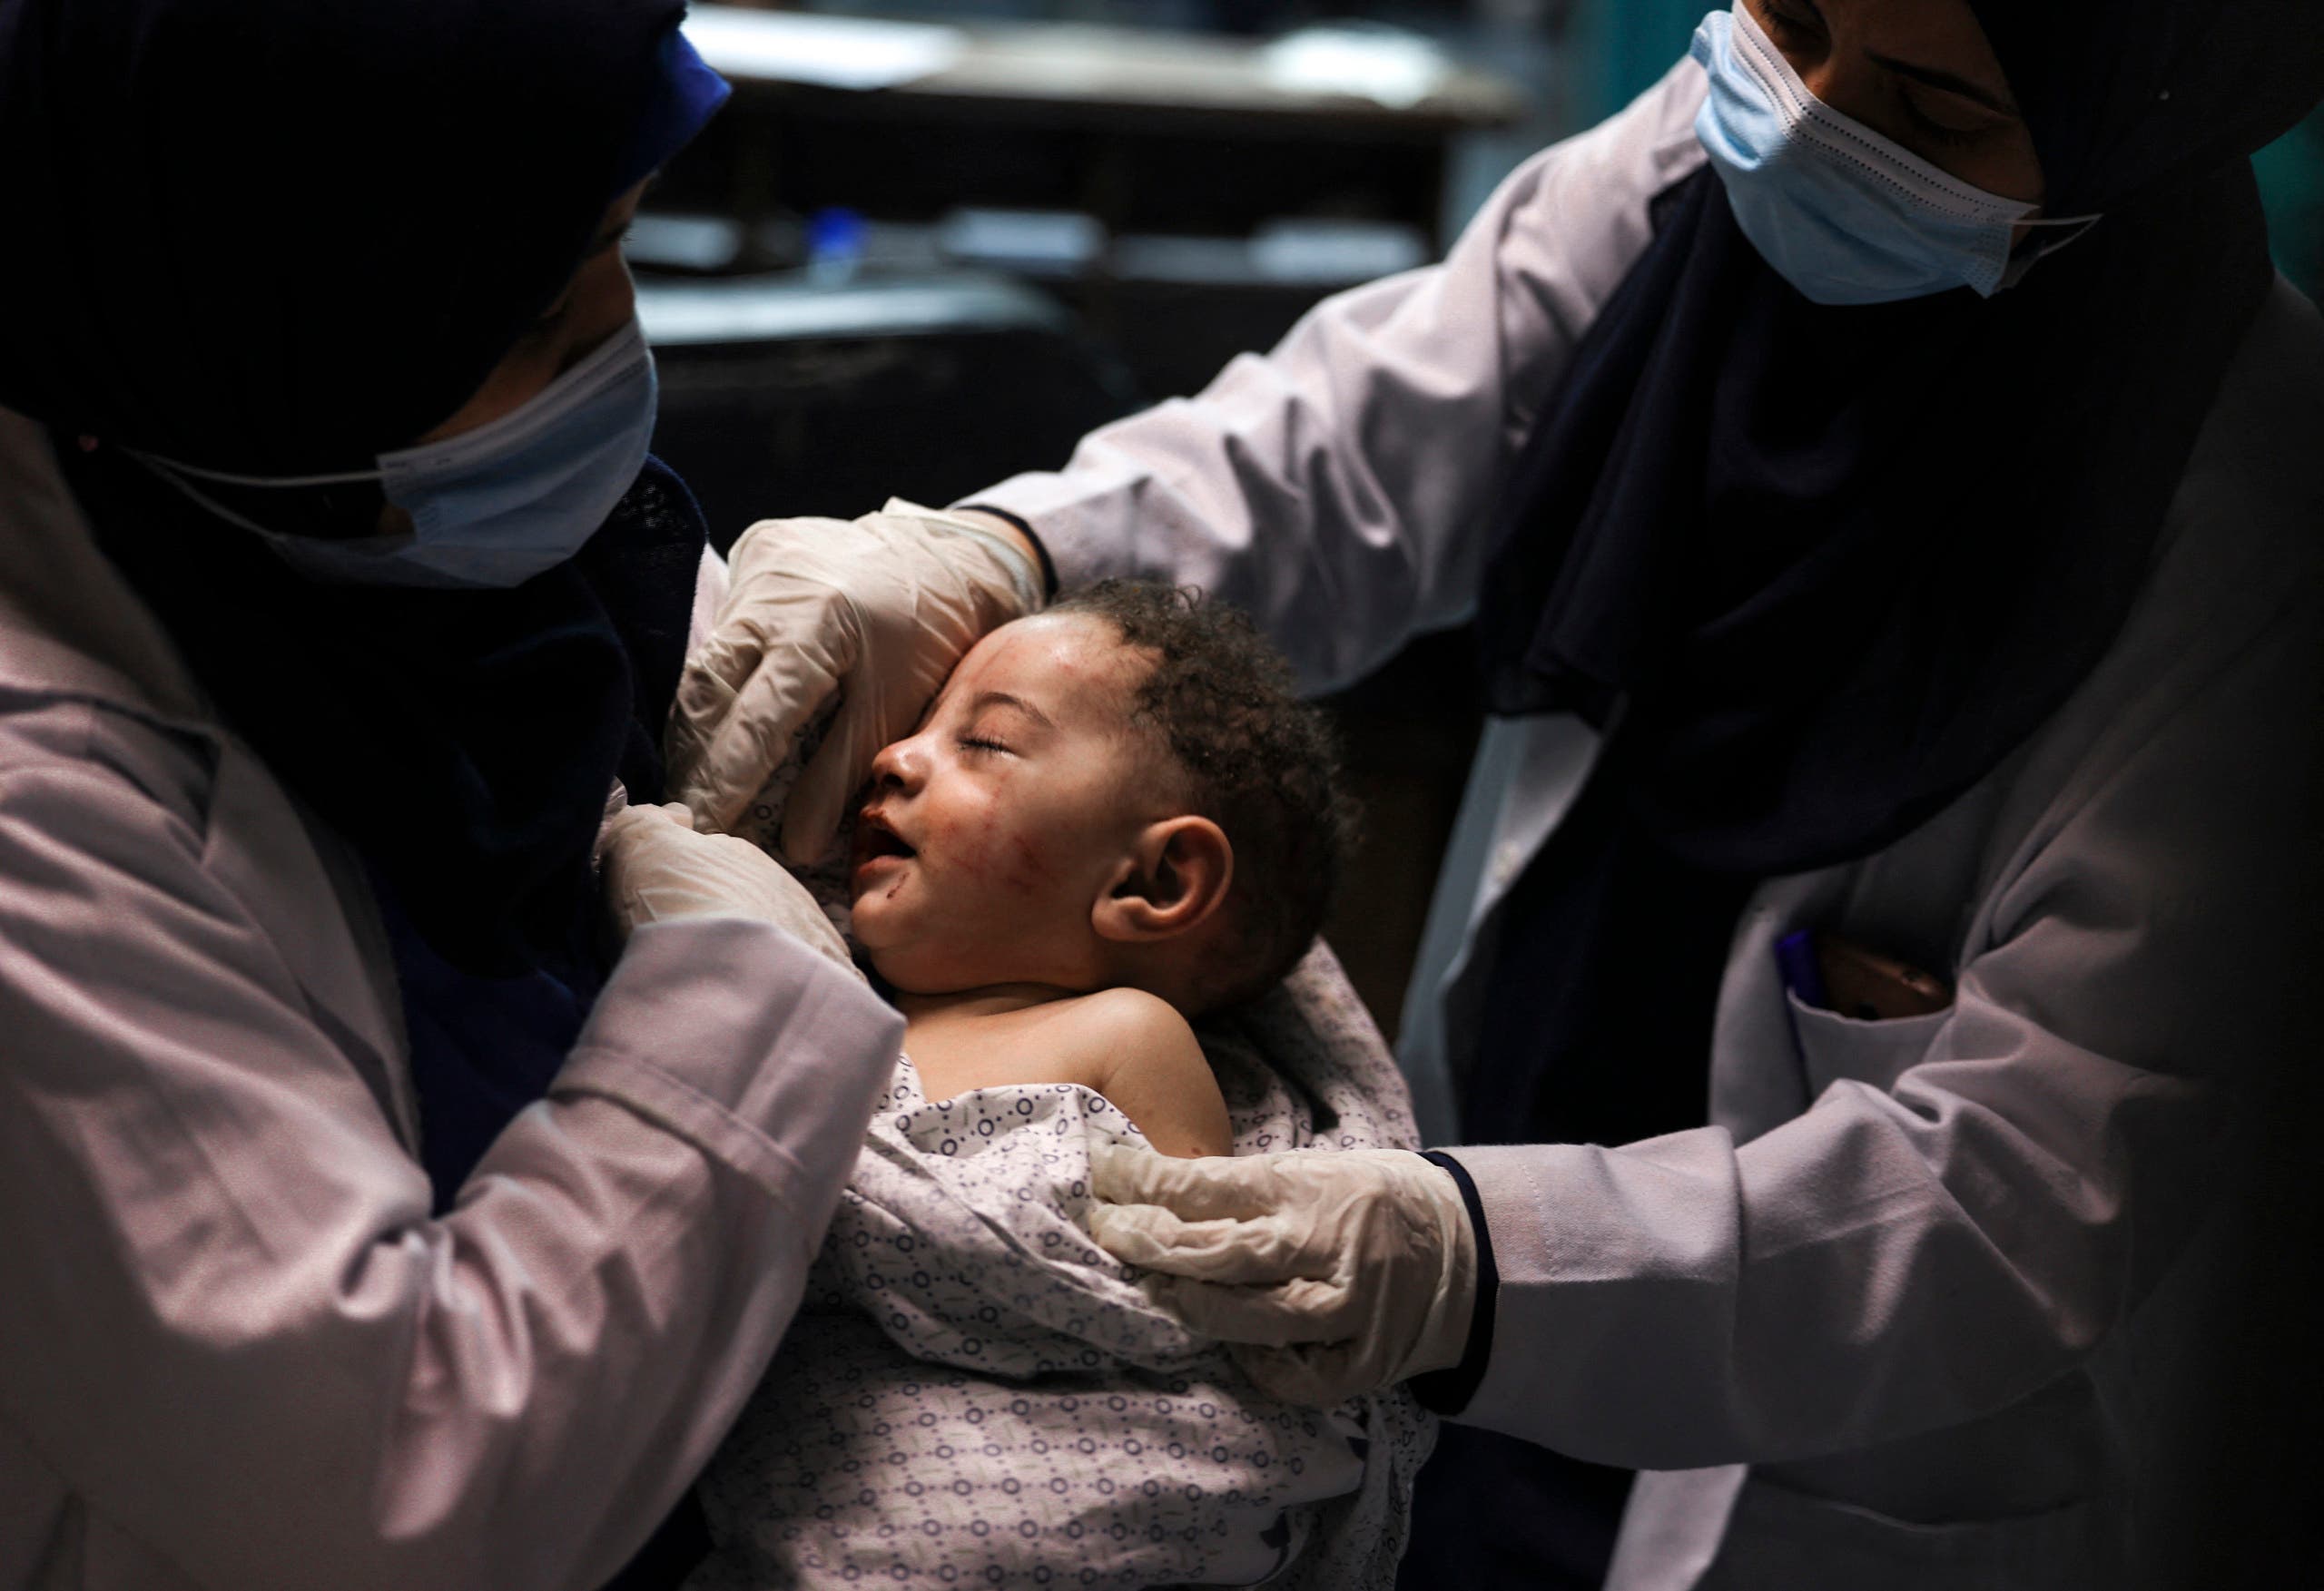 A nurse holds a baby, who was pulled alive from under the rubble while seven other family members perished, at Al-Shifa Hospital, after an Israeli air strike struck al-Shati Refugee Camp without advance warning during the night, in Gaza City early on May 15, 2021. (AFP)